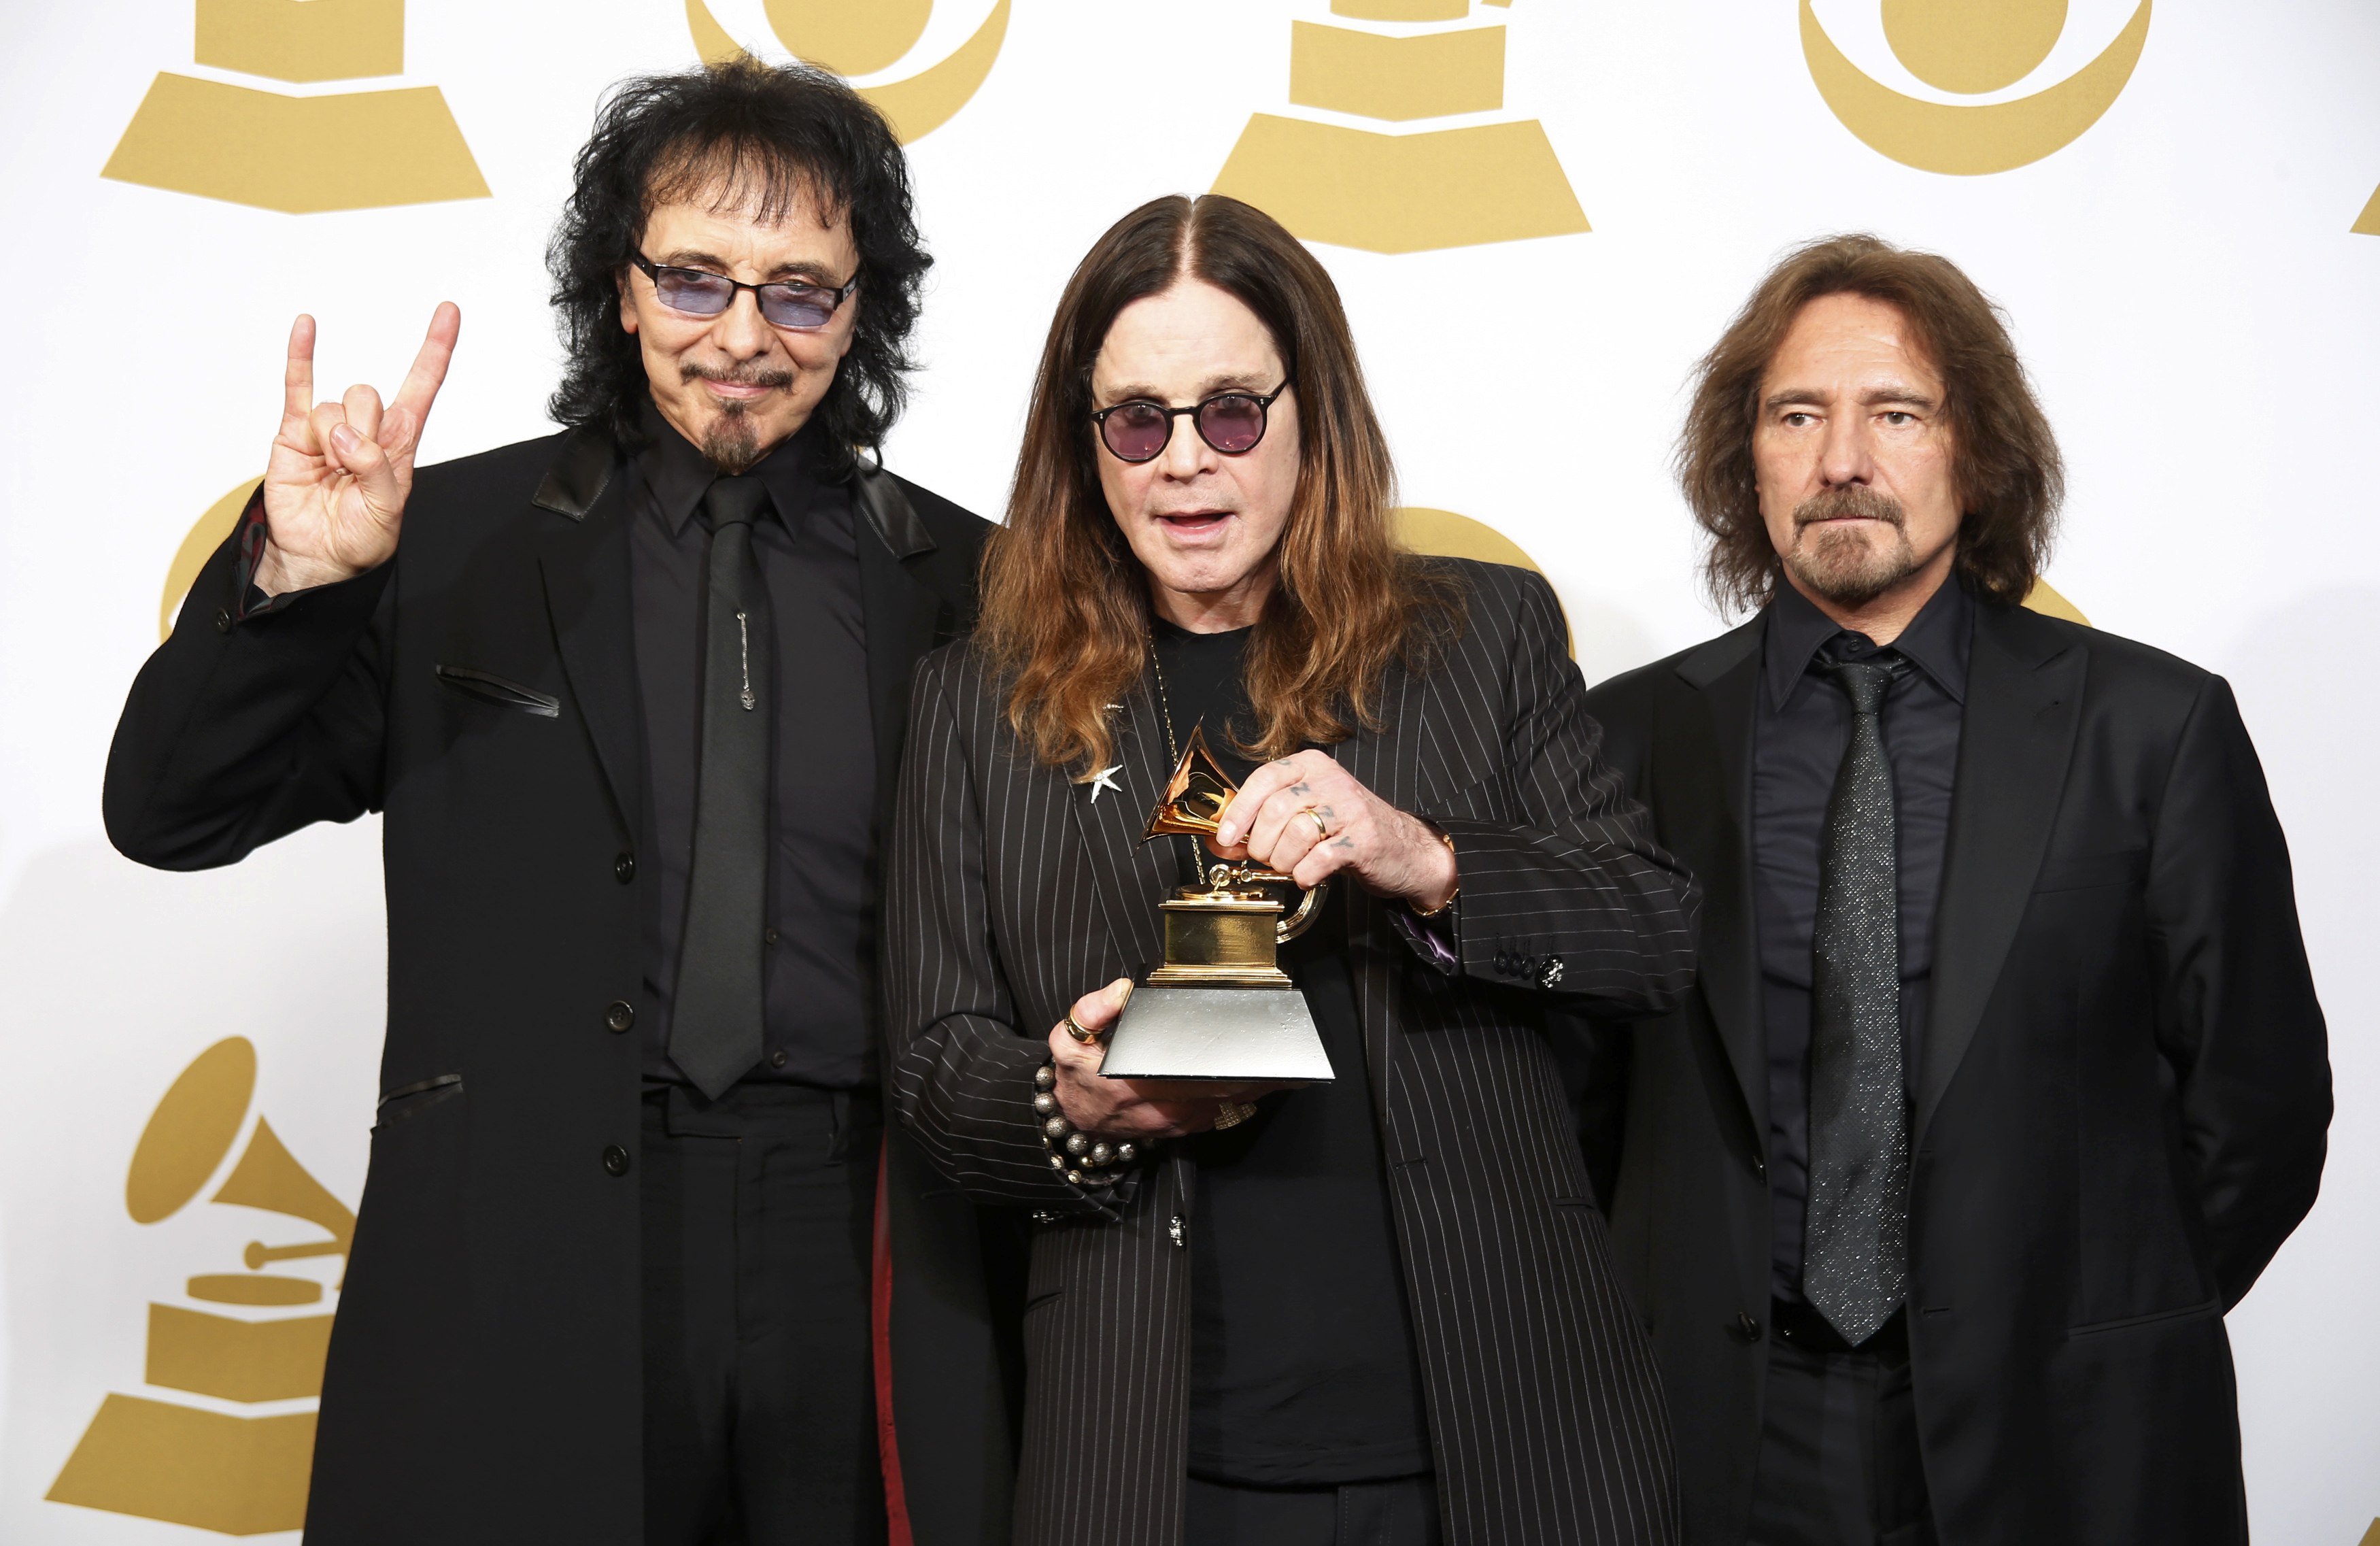 Musicians Tony Iommi, Ozzy Osbourne and Geezer Butler of Black Sabbath pose with their award for Best Metal Performance for "God is Dead?" at the 56th annual Grammy Awards in Los Angeles